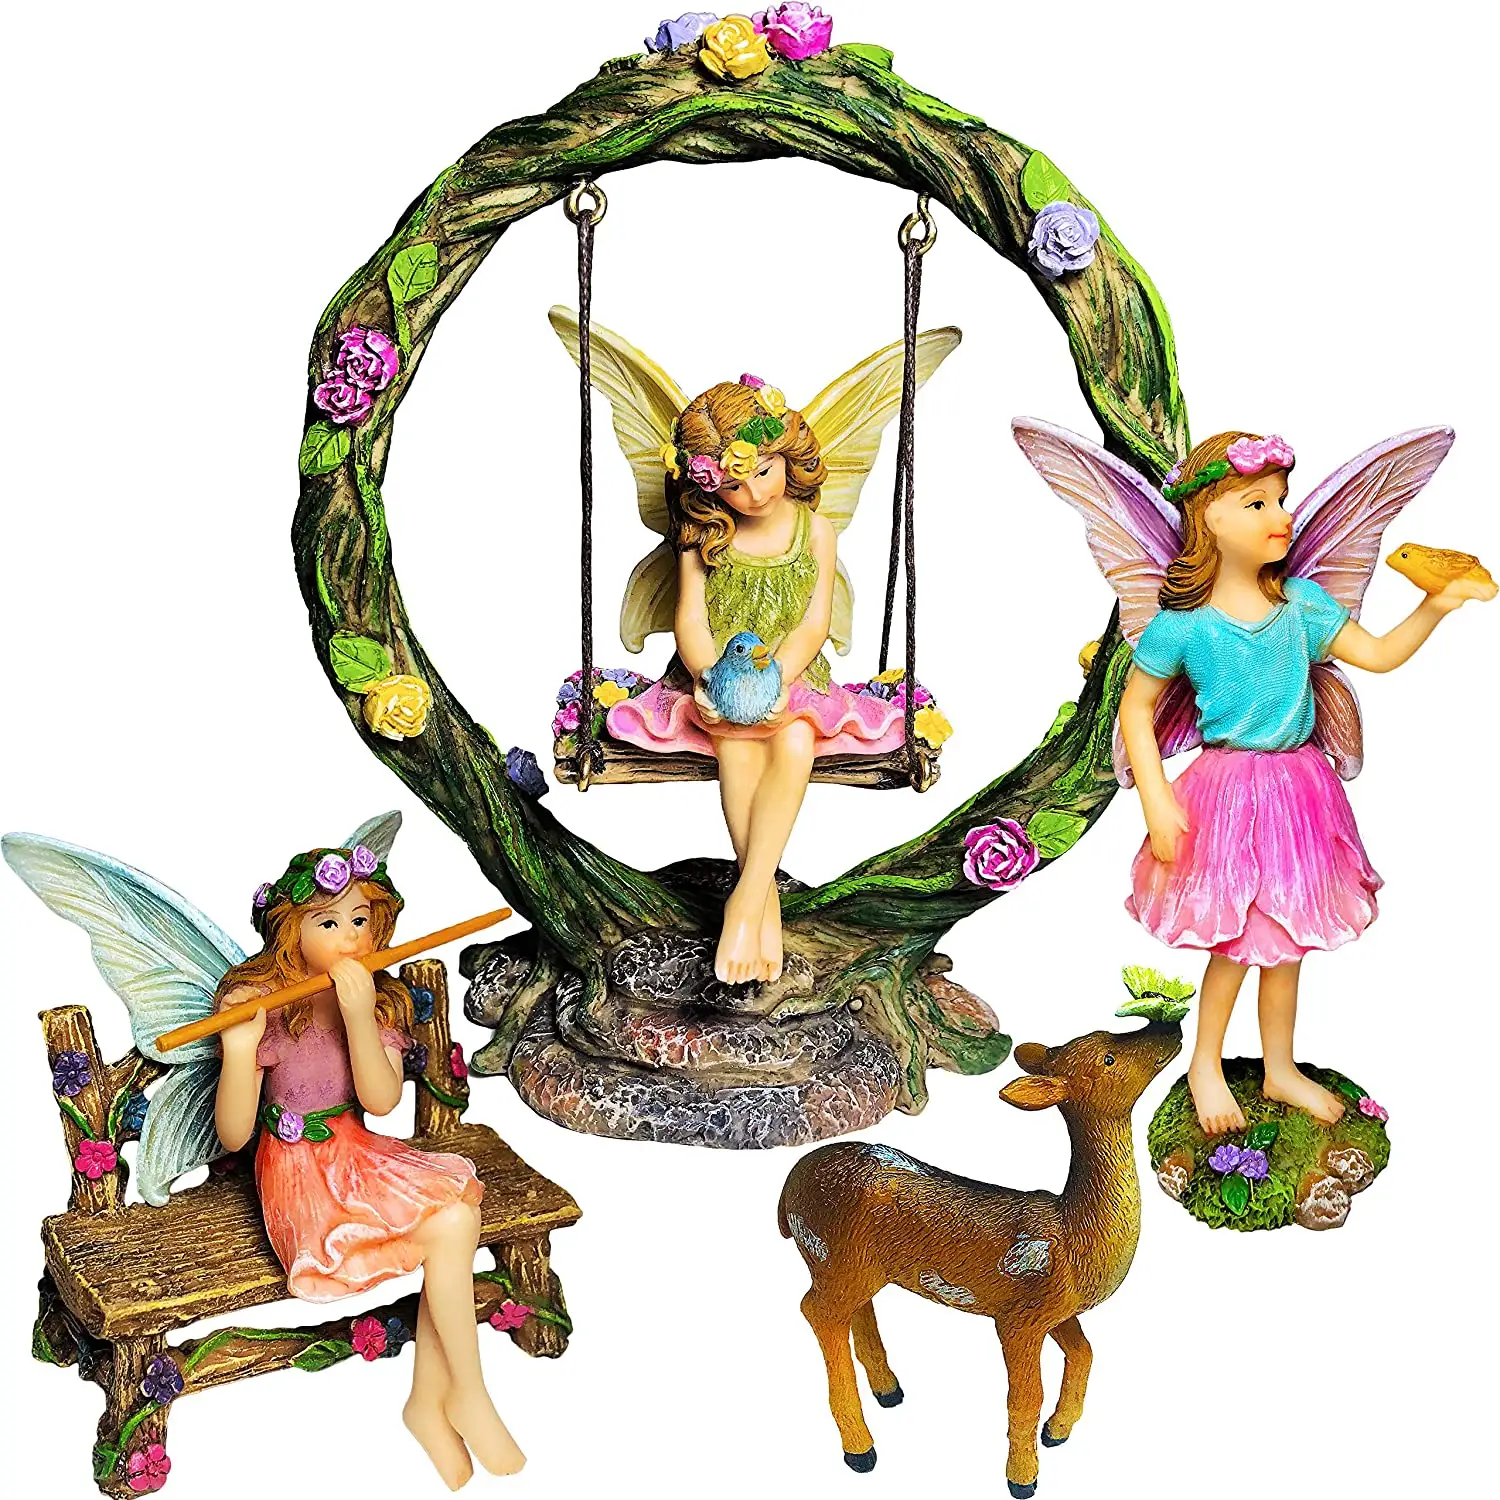 Miniature Fairy Garden Figurines with Accessories Swing Set of 6 pcs